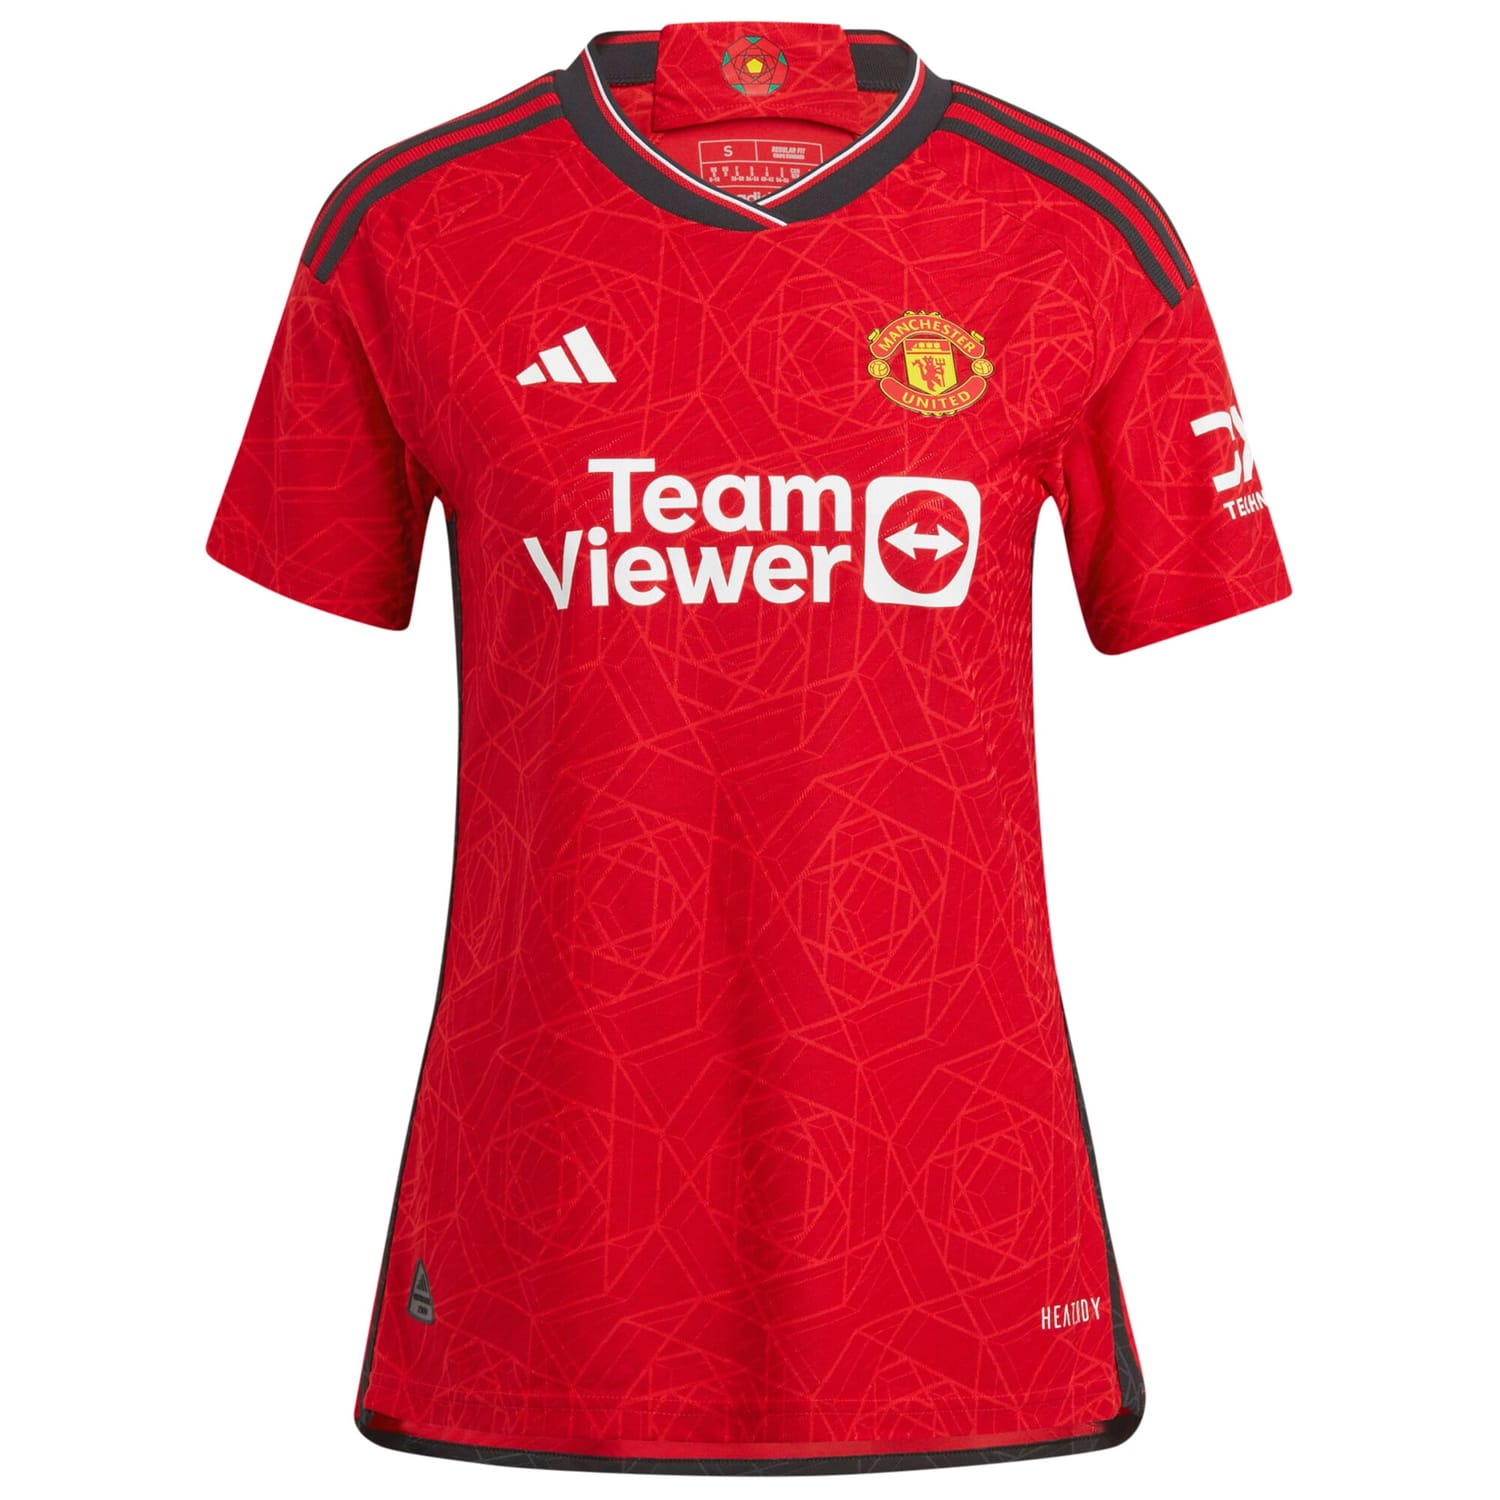 Premier League Manchester United Home Cup Authentic Jersey Shirt 2023-24 player Melvine Malard printing for Women